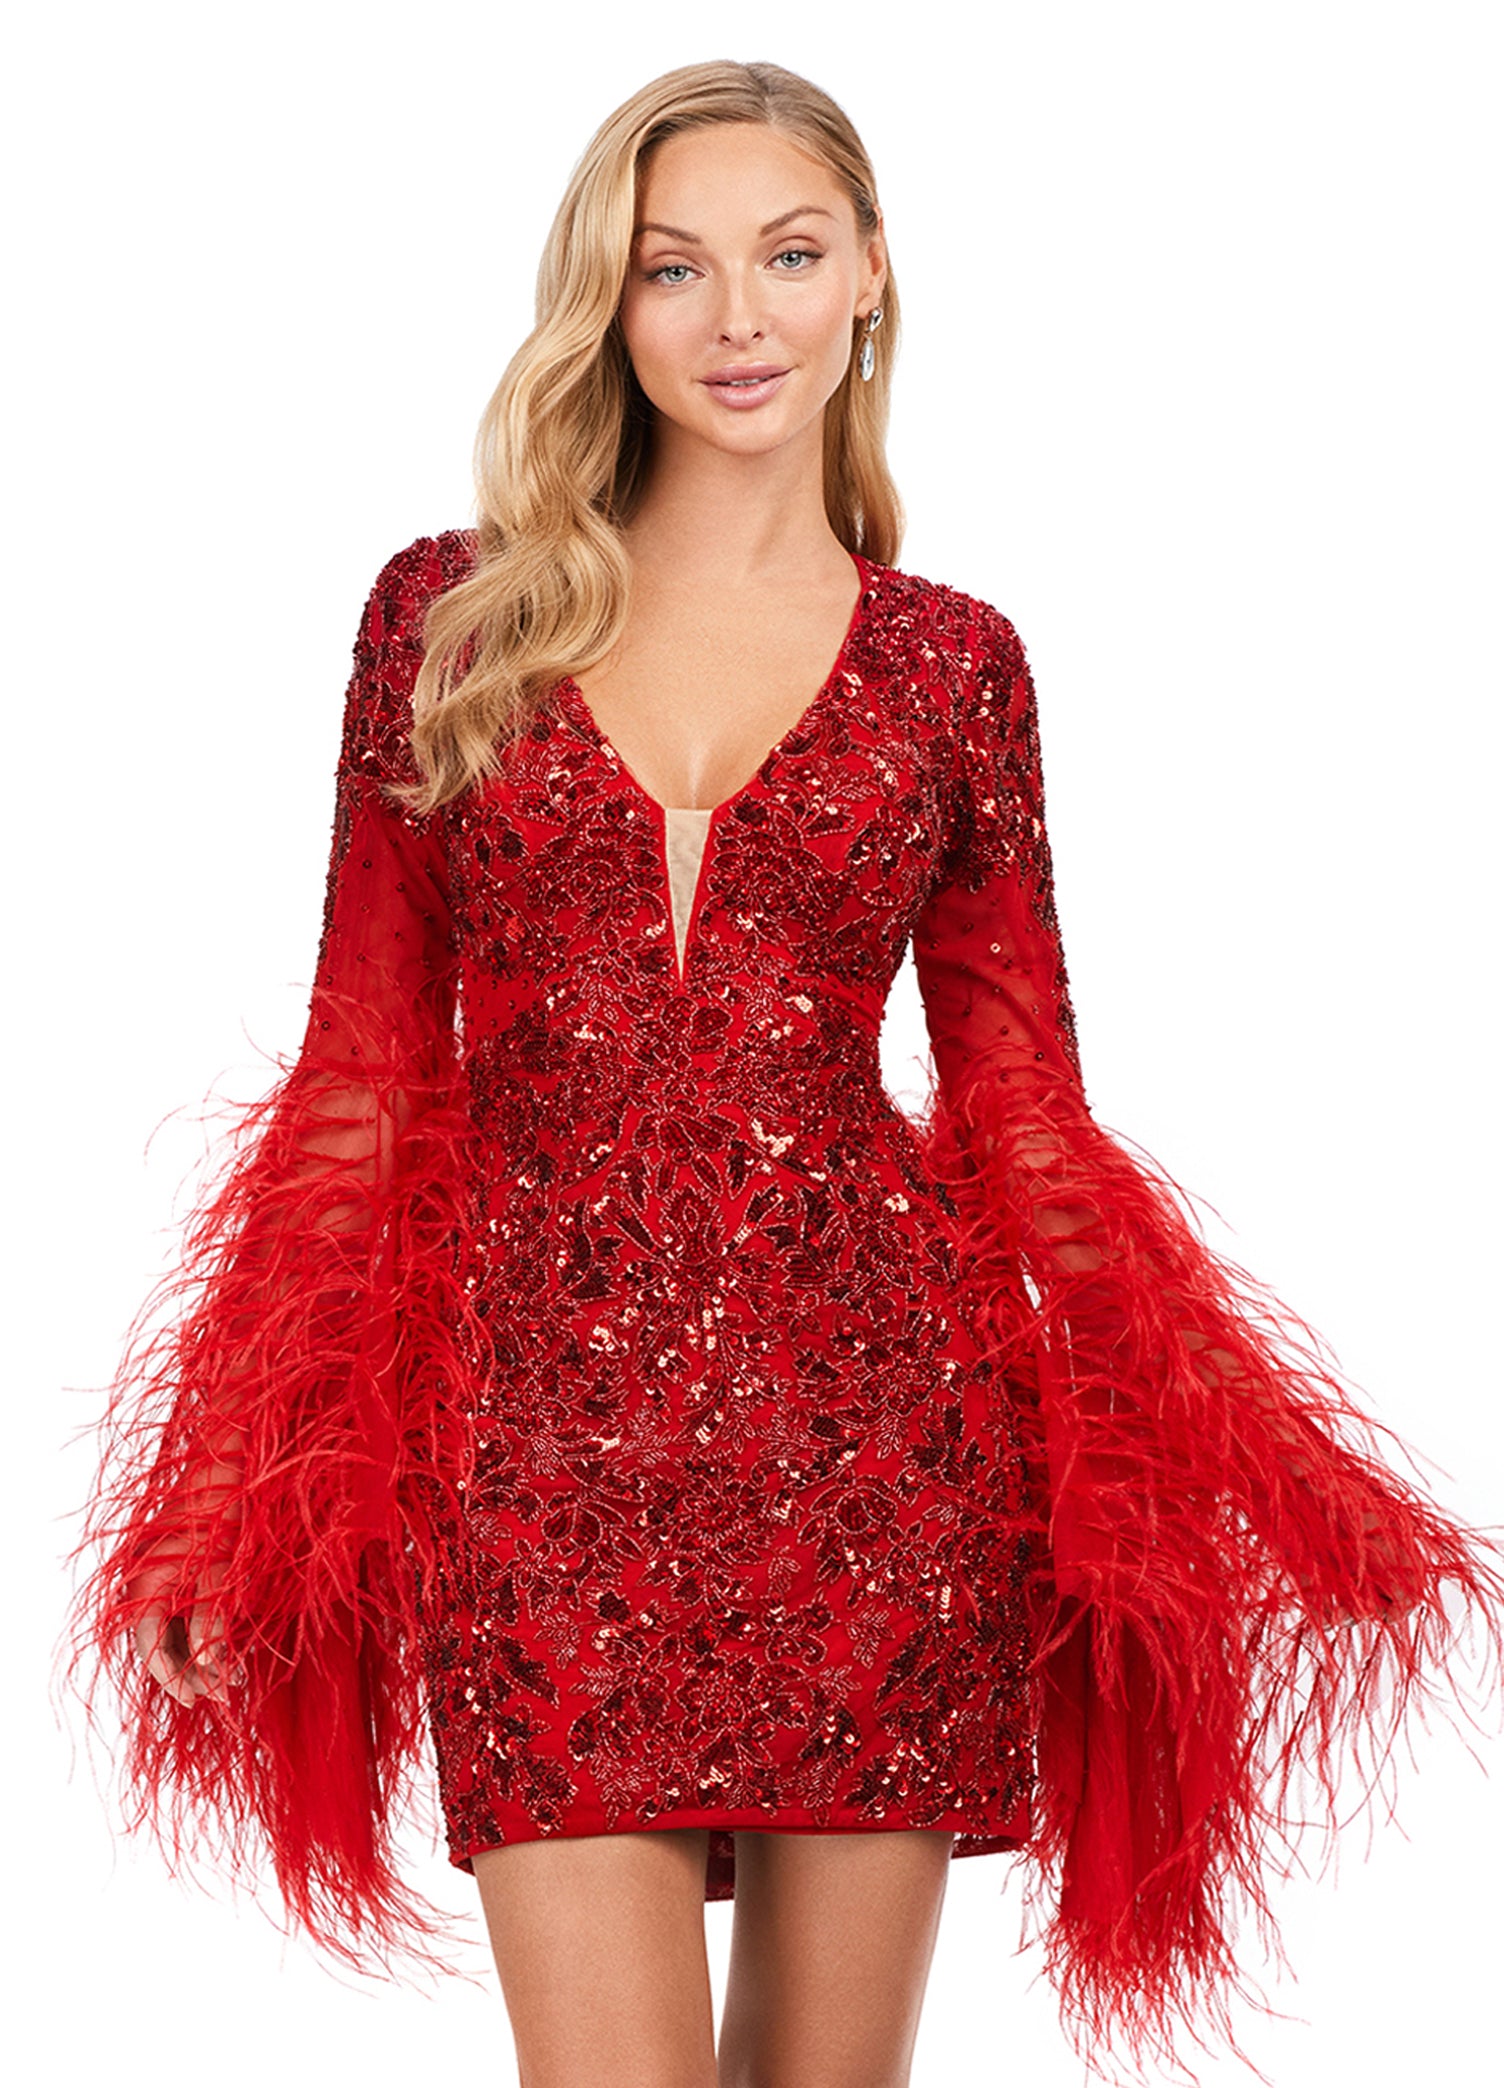 Ashley Lauren 4603 Fully Beaded Bell Sleeve With Feathers V-Neck Cocktail Homecoming Dress. Make a statement in this fully beaded cocktail dress with feather adorned flare sleeves! The look is complete with a V-neckline, full back and fitted skirt.